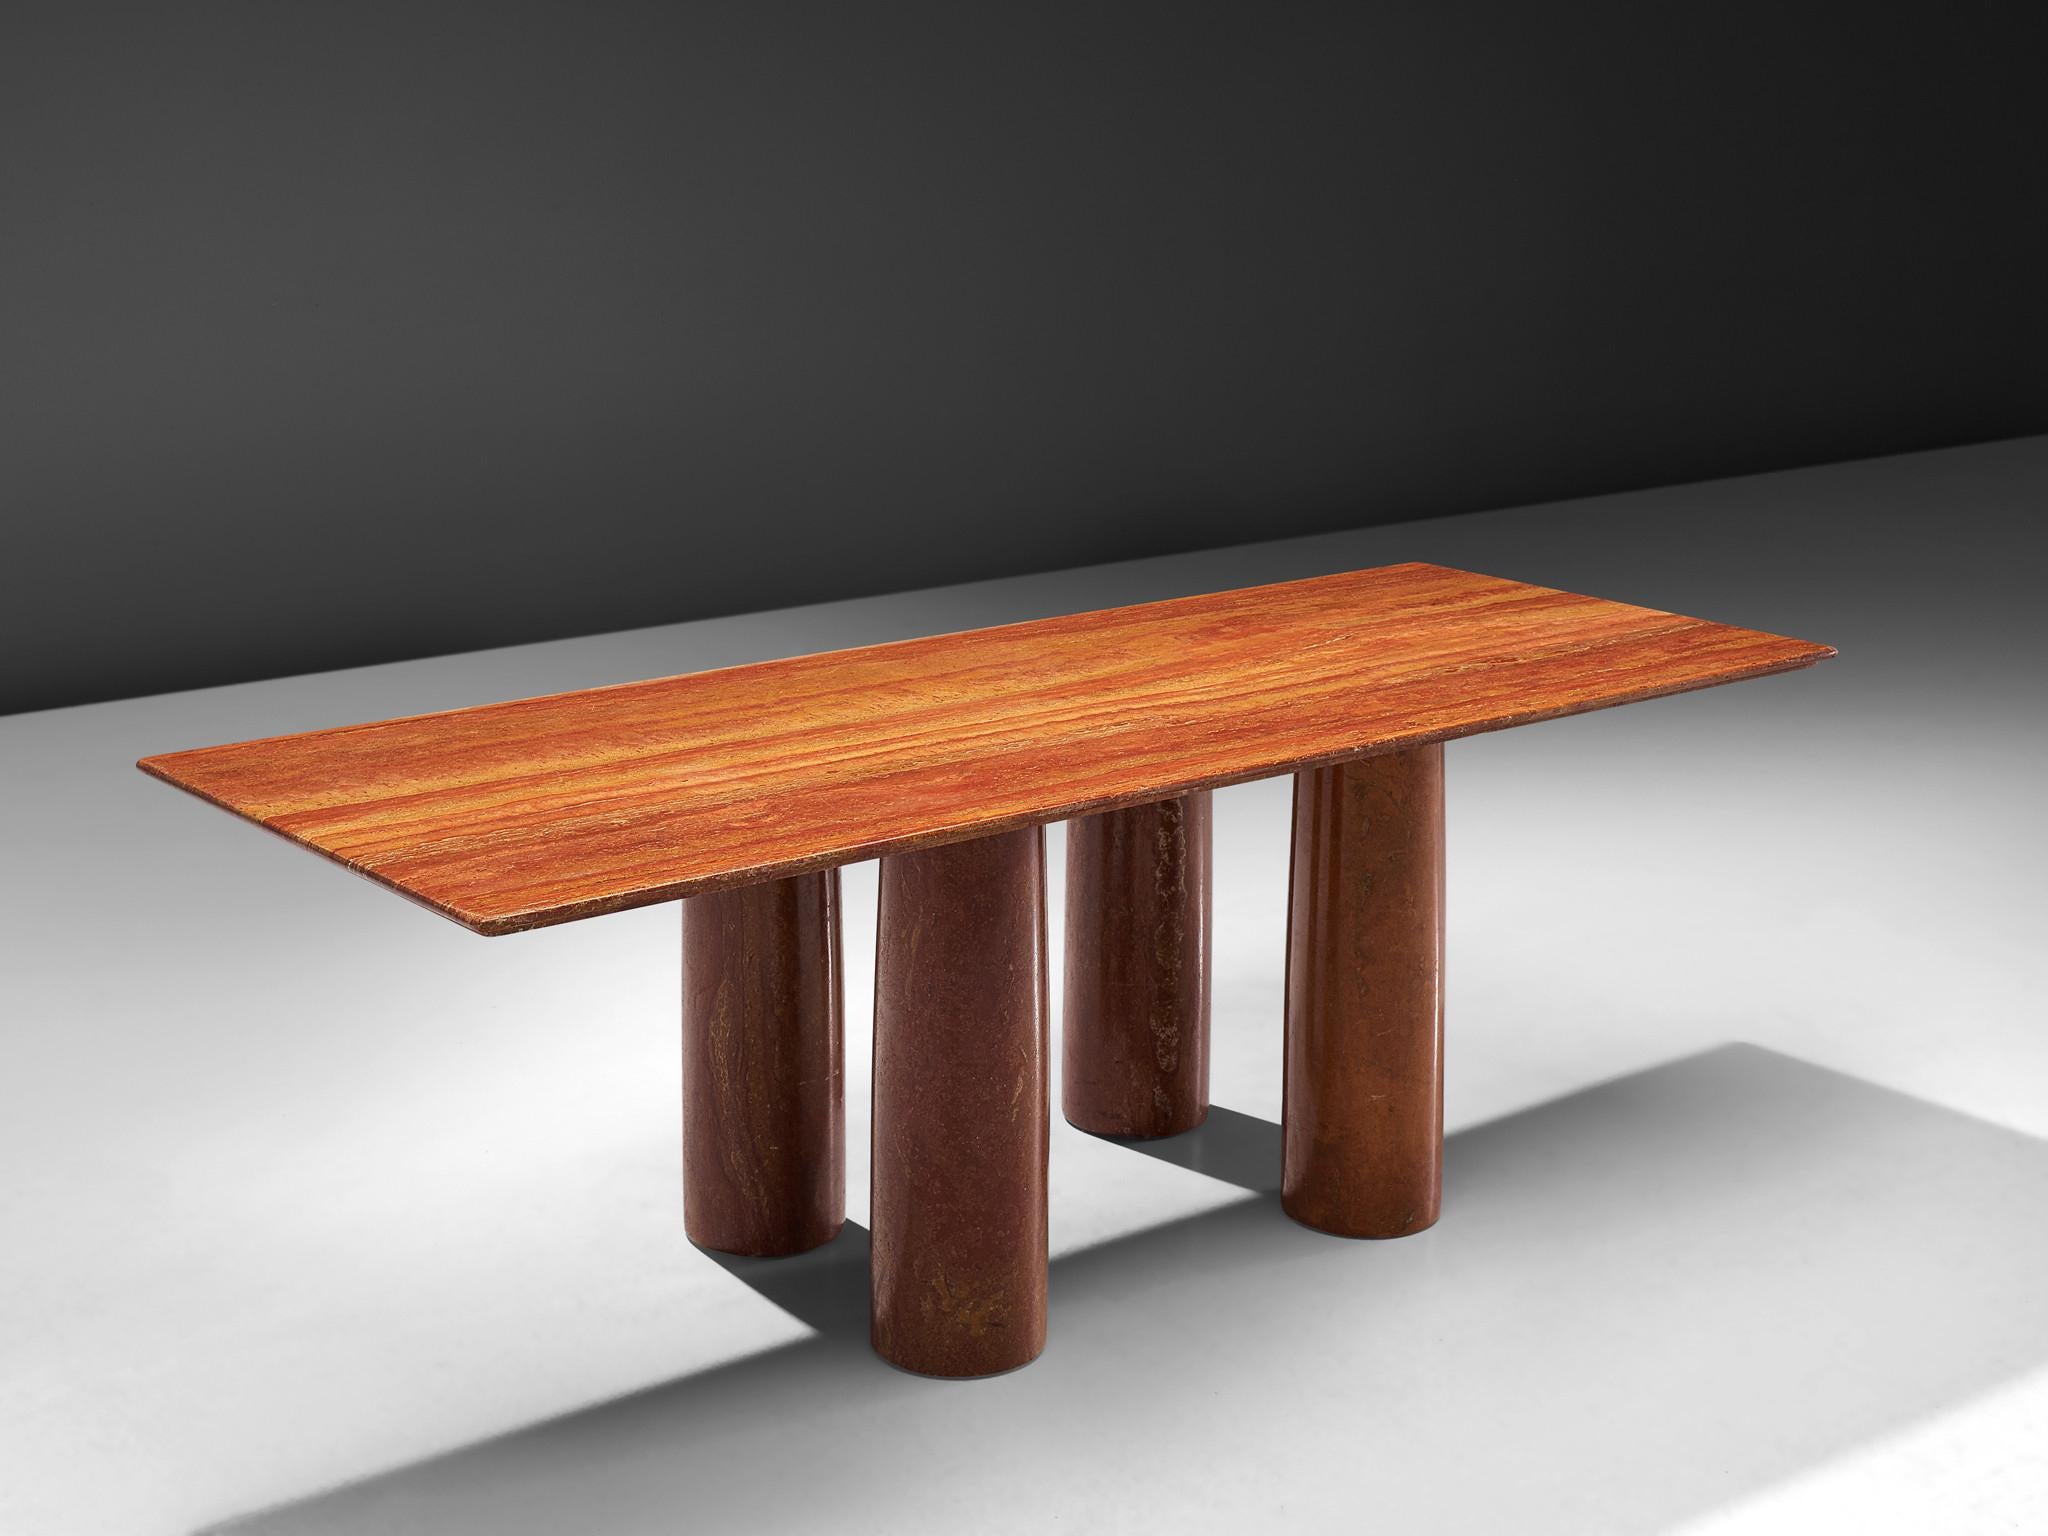 Mario Bellini 'Il Colonato' table, red travertine, Italy, 1970s

This 'Il Colonnato' dining table was designed by Italian designer Mario Bellini. For the series of tables, Bellini was inspired by ancient Roman columns. This table consist of four